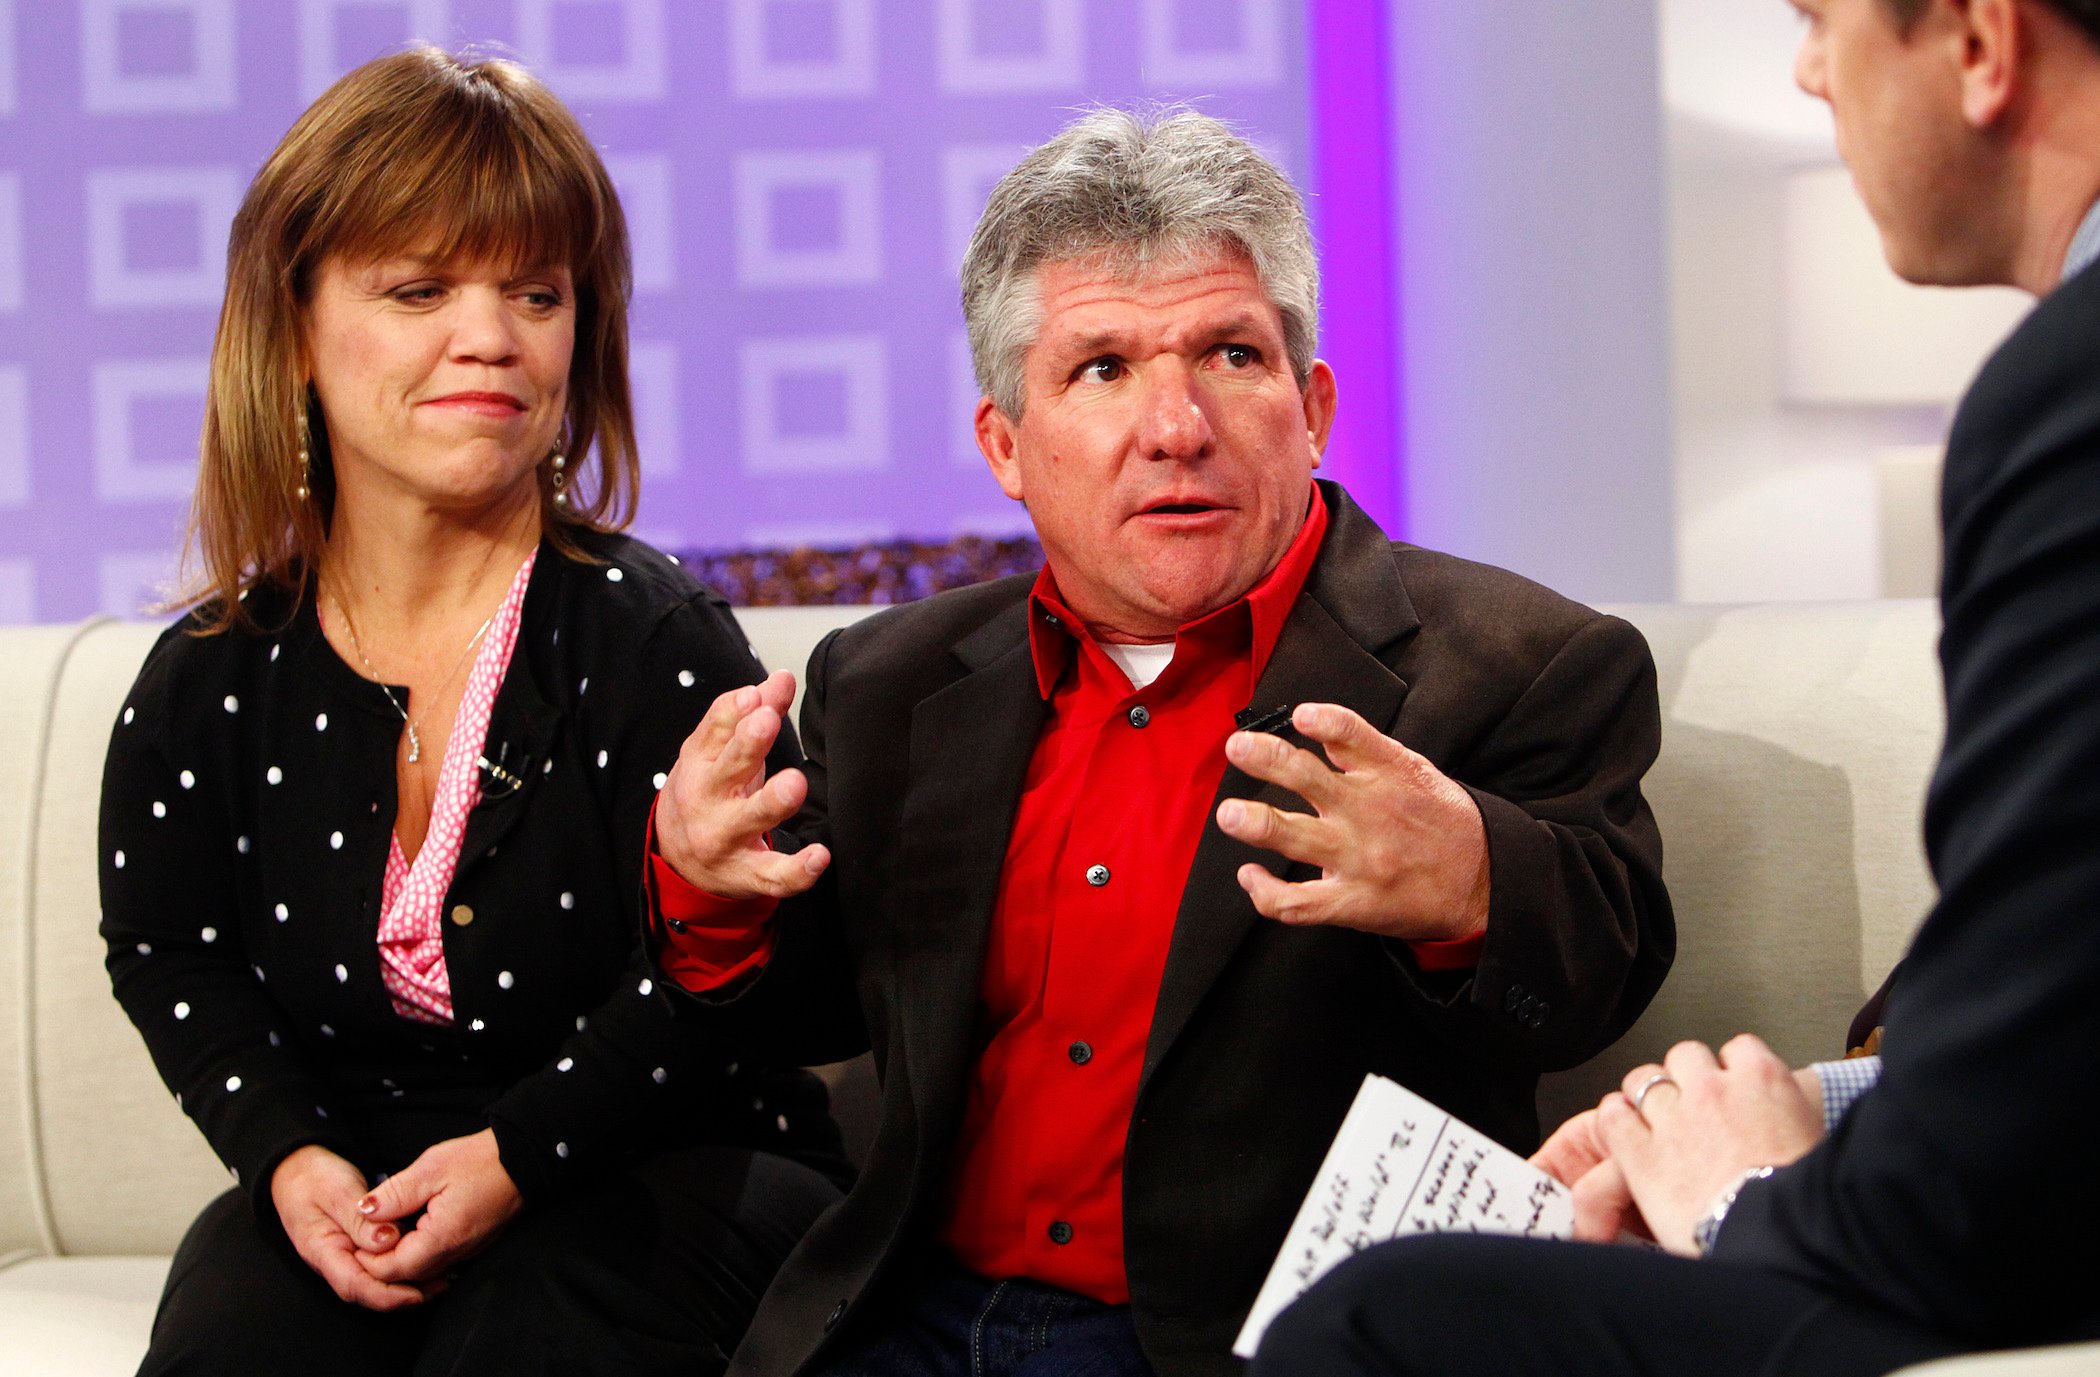 Amy Roloff and Matt Roloff from 'Little People, Big World' appear on a talk show. Zach Roloff and Tori Roloff are the other regulars on the show from the family.